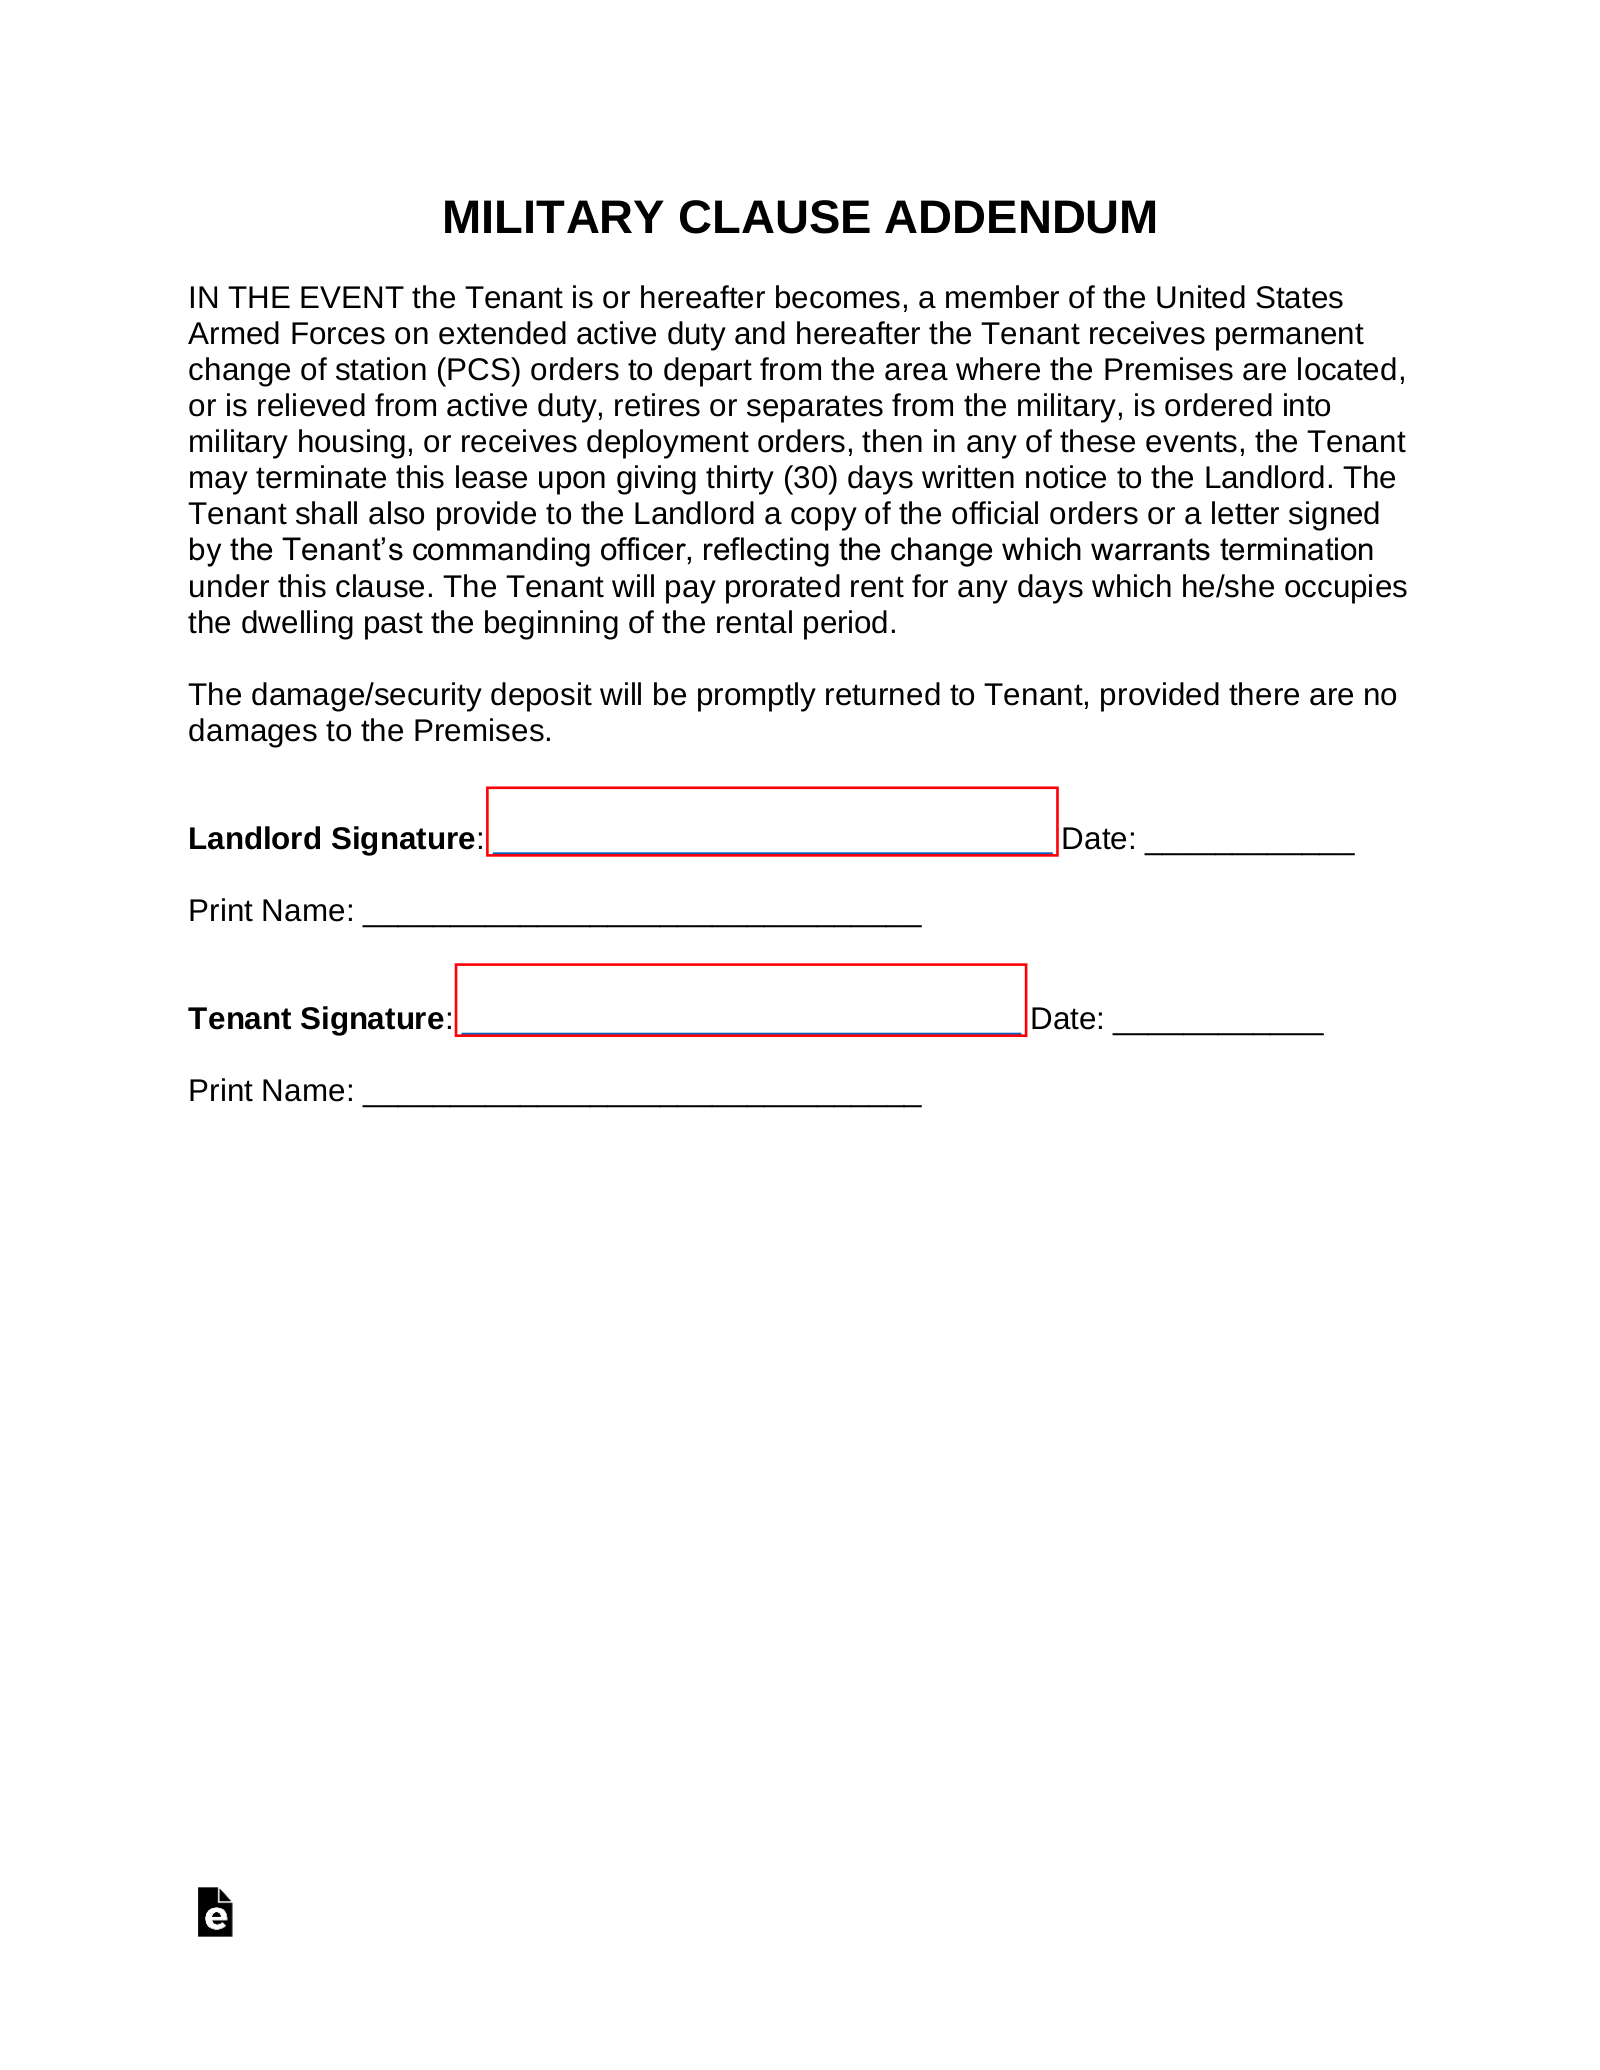 Military Lease Clause Addendum Template